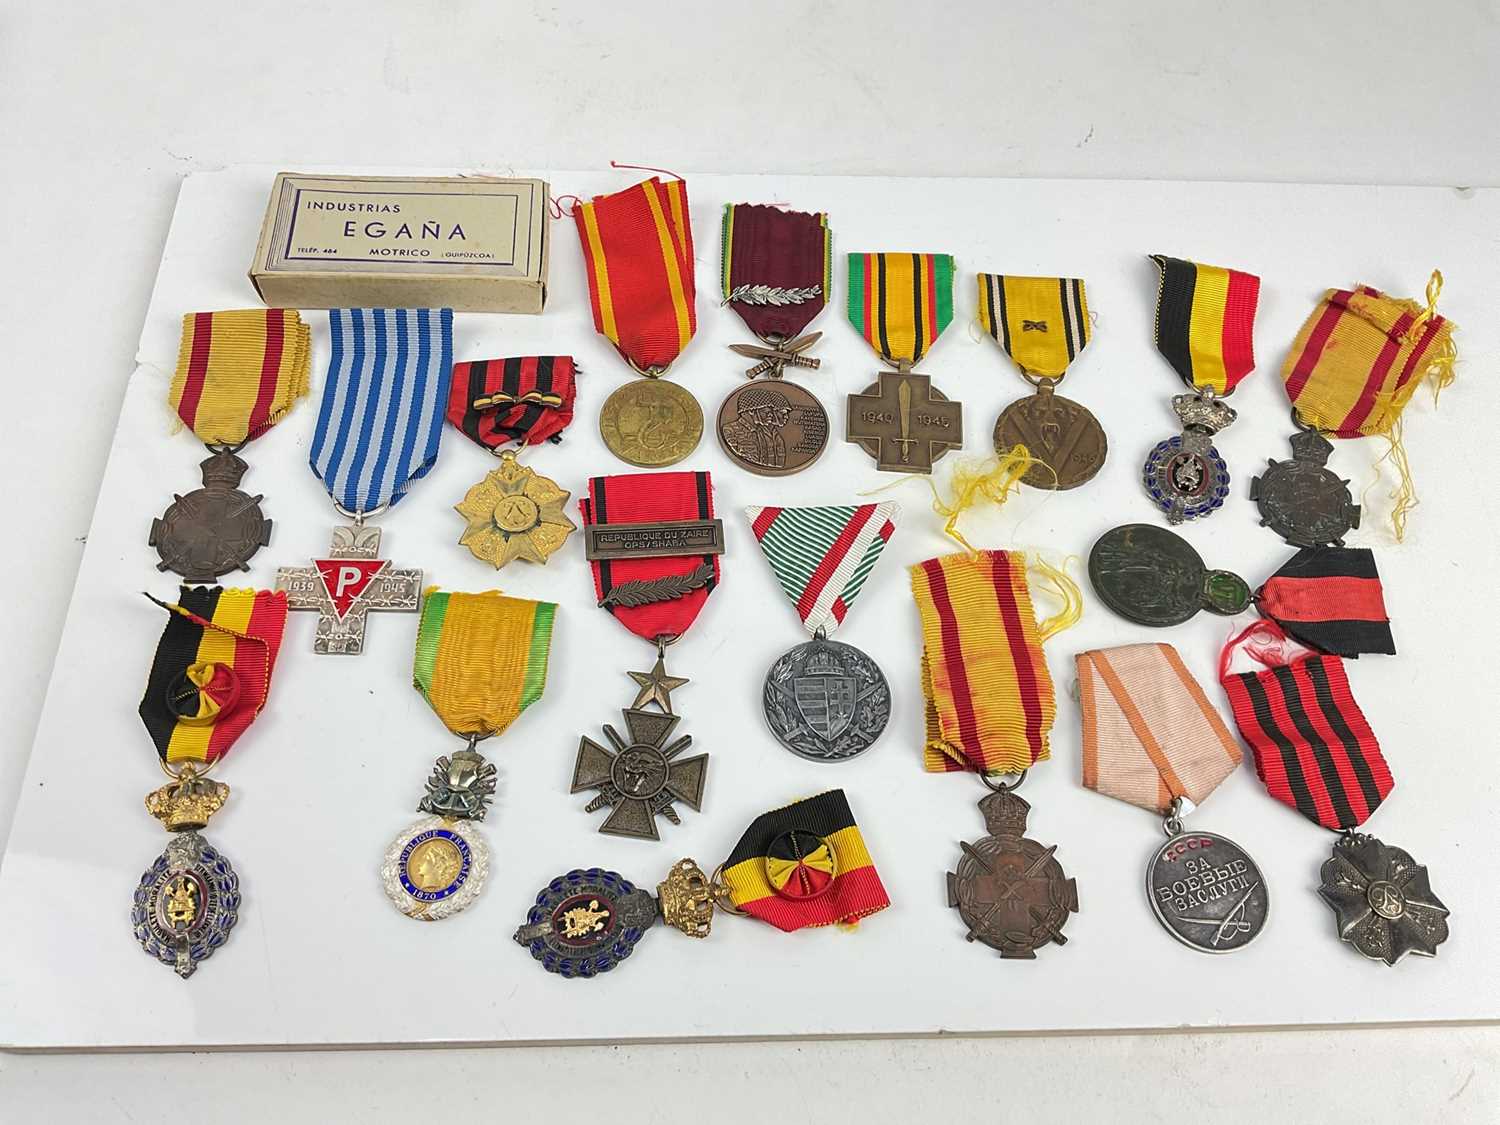 Large collection of European First and Second World War medals and decorations.